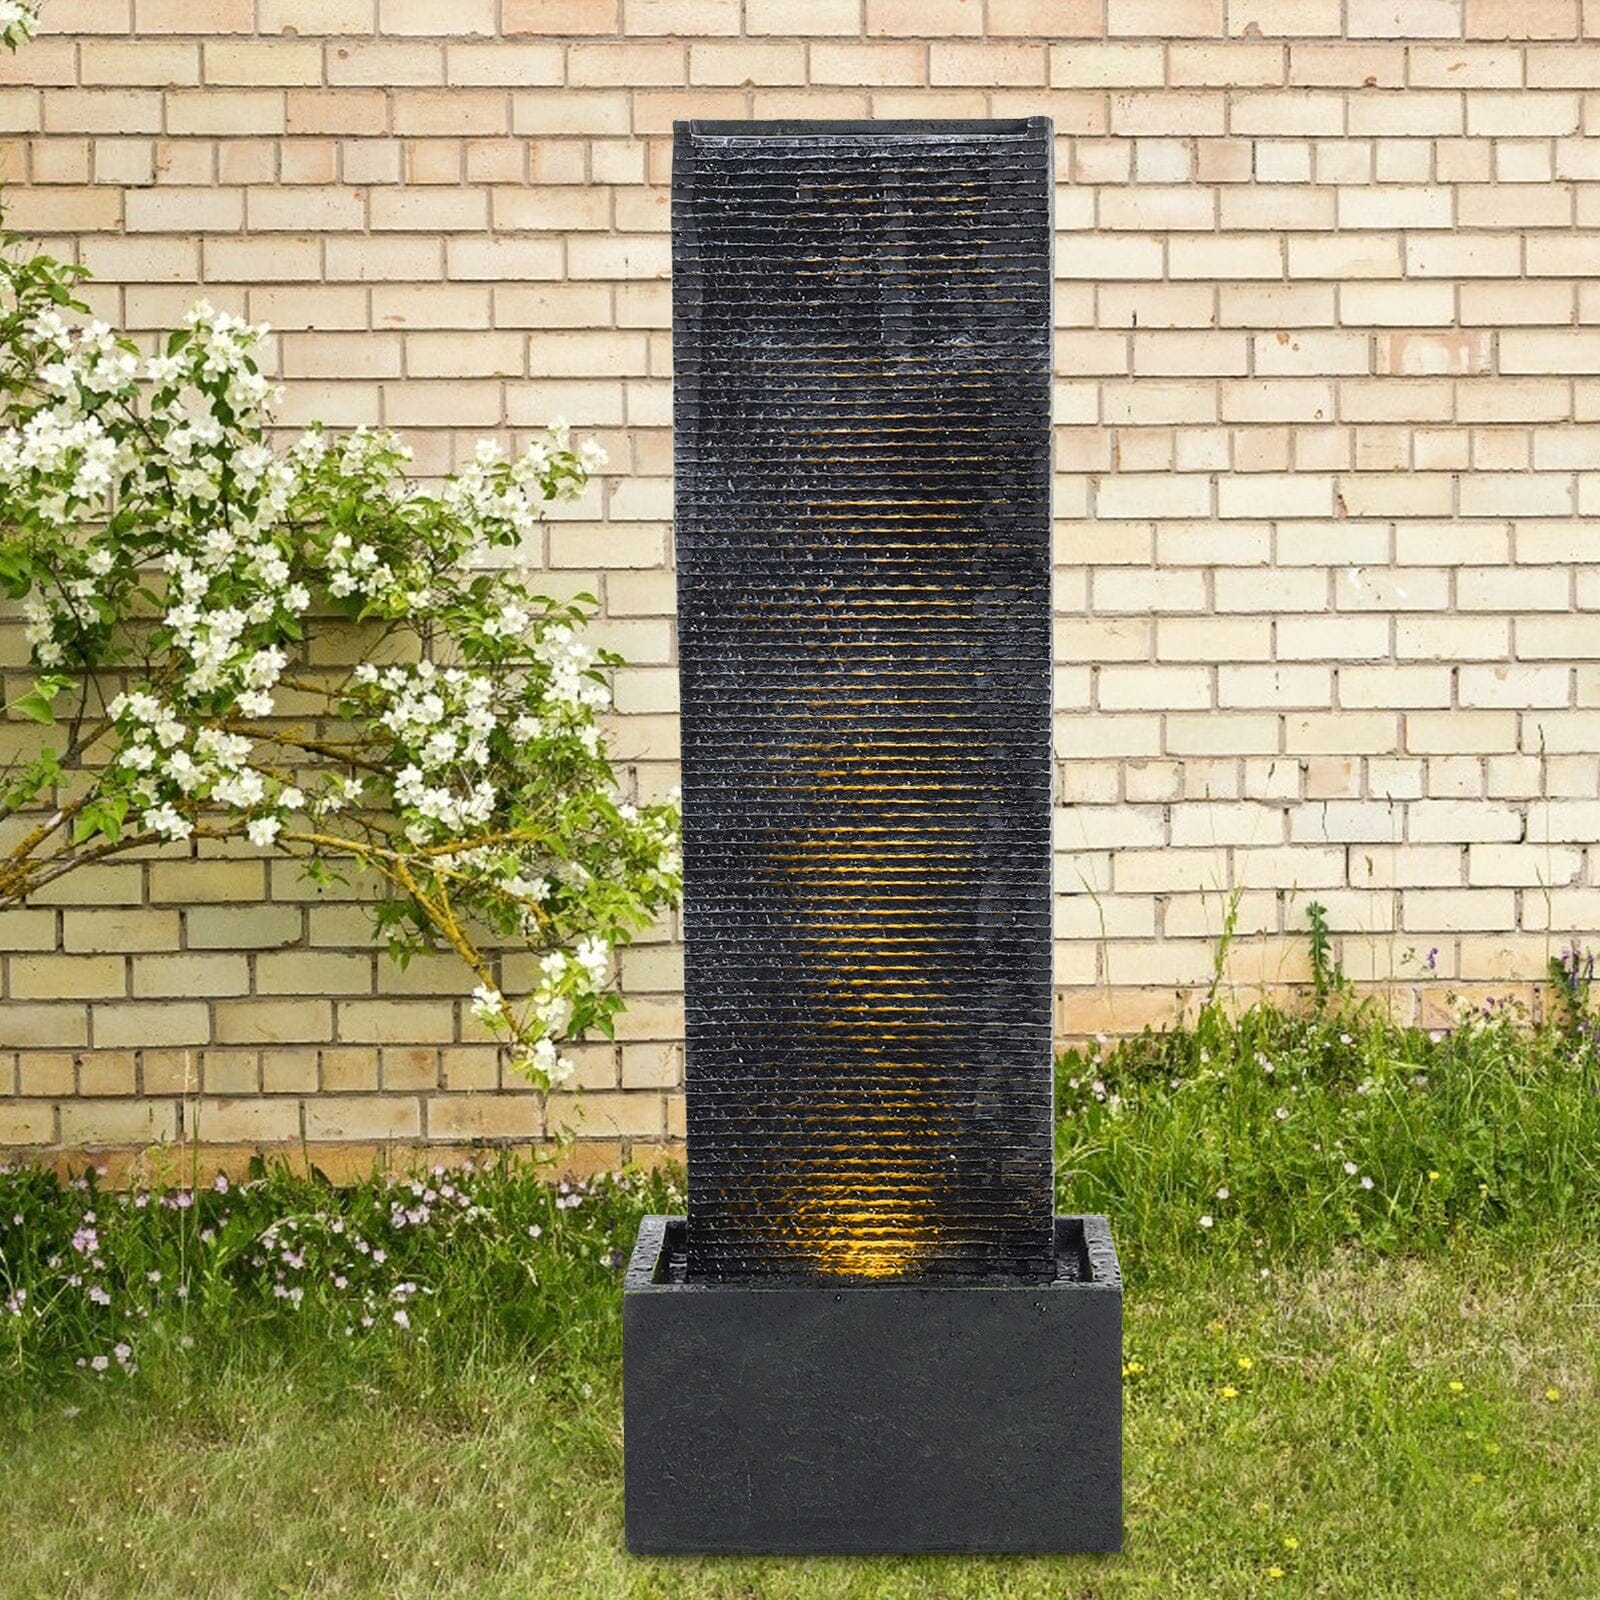 98cm H Black Rectangle Waterfall Stone Look Water Fountain with LED Light Fountains Living and Home 